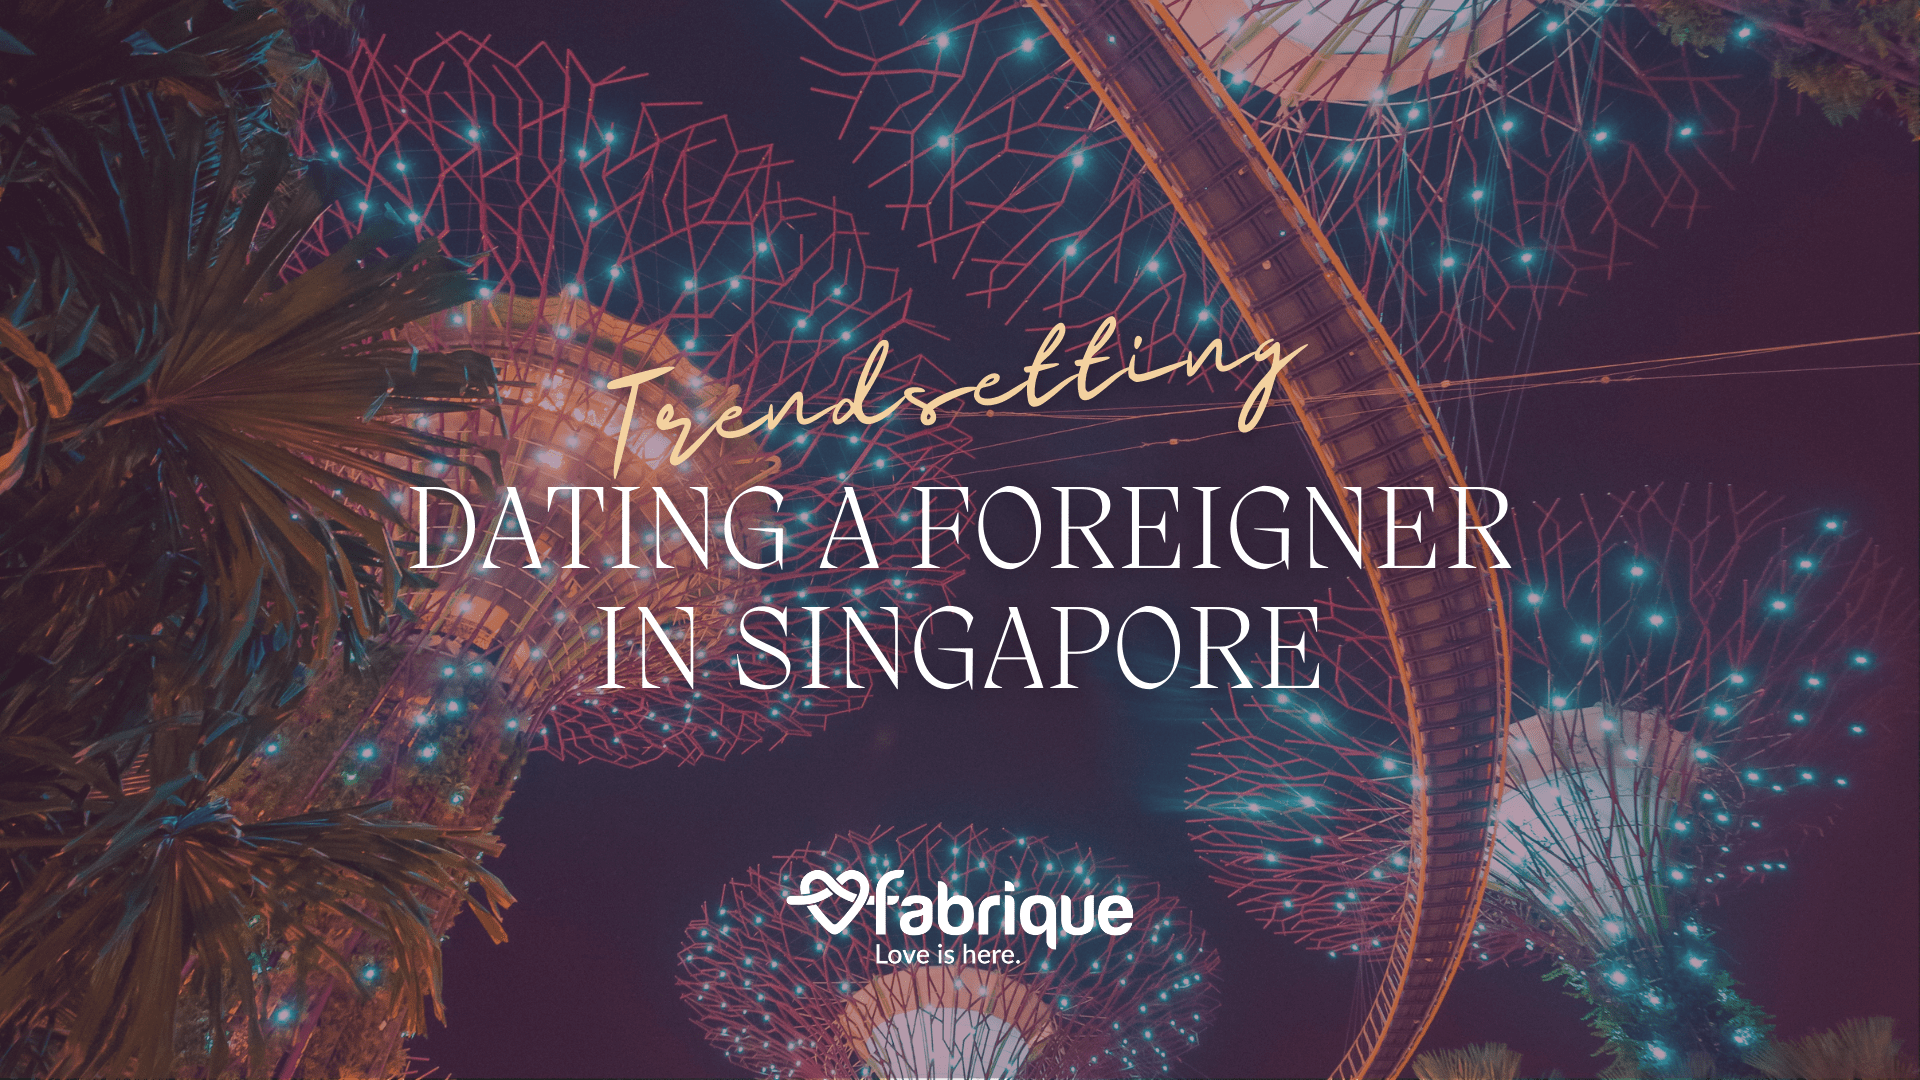 Trendsetting dating a foreigner in Singapore banner